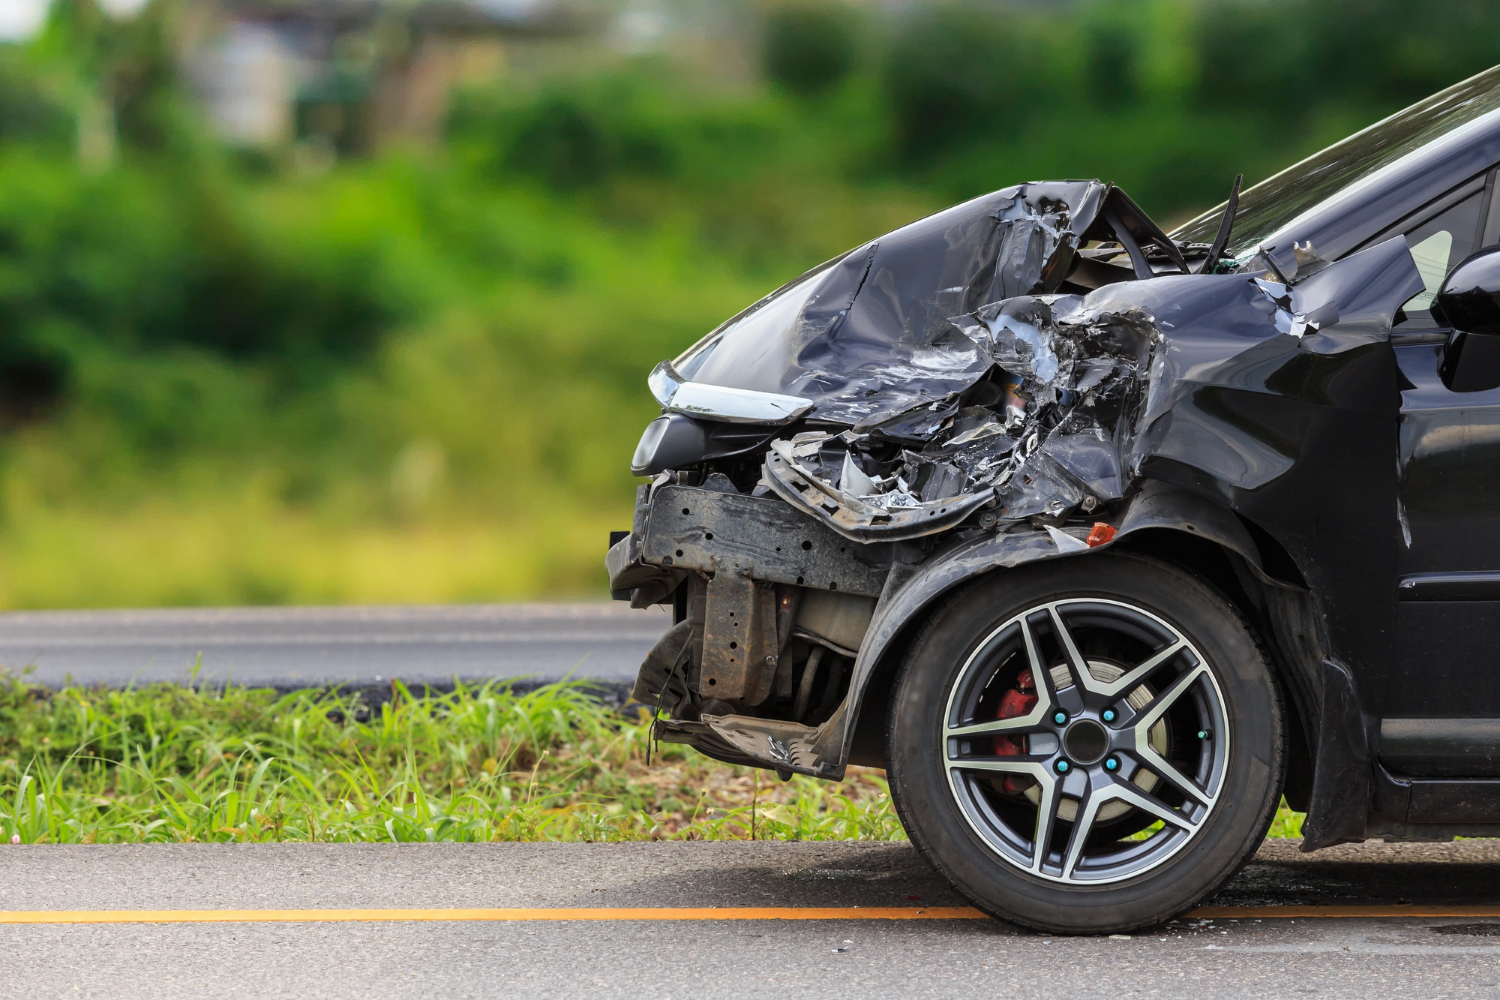 front-black-car-get-damaged-by-accident-road